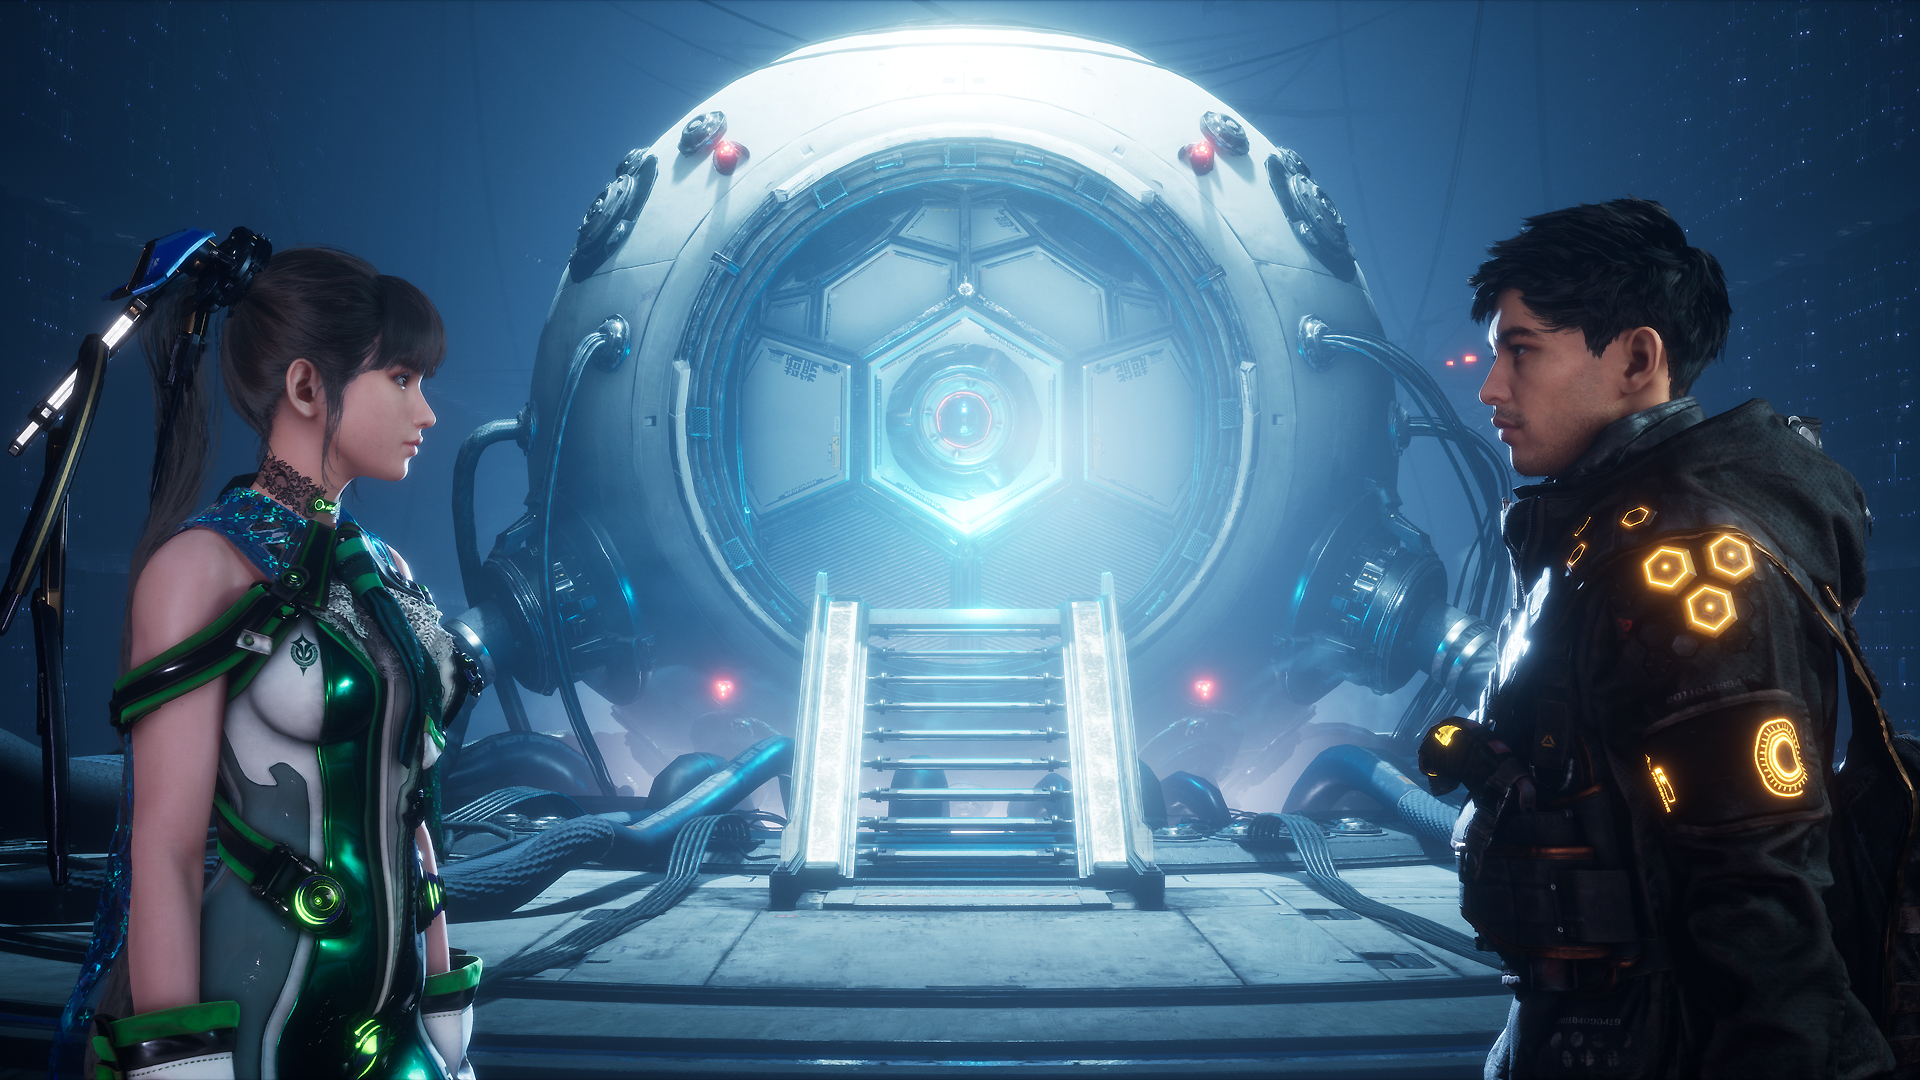  "Eve and Adam face each other in the foreground. Behind them is a short stairwell that leads up to a large circular contraption. Multiple leads and wires are plugged into it. "